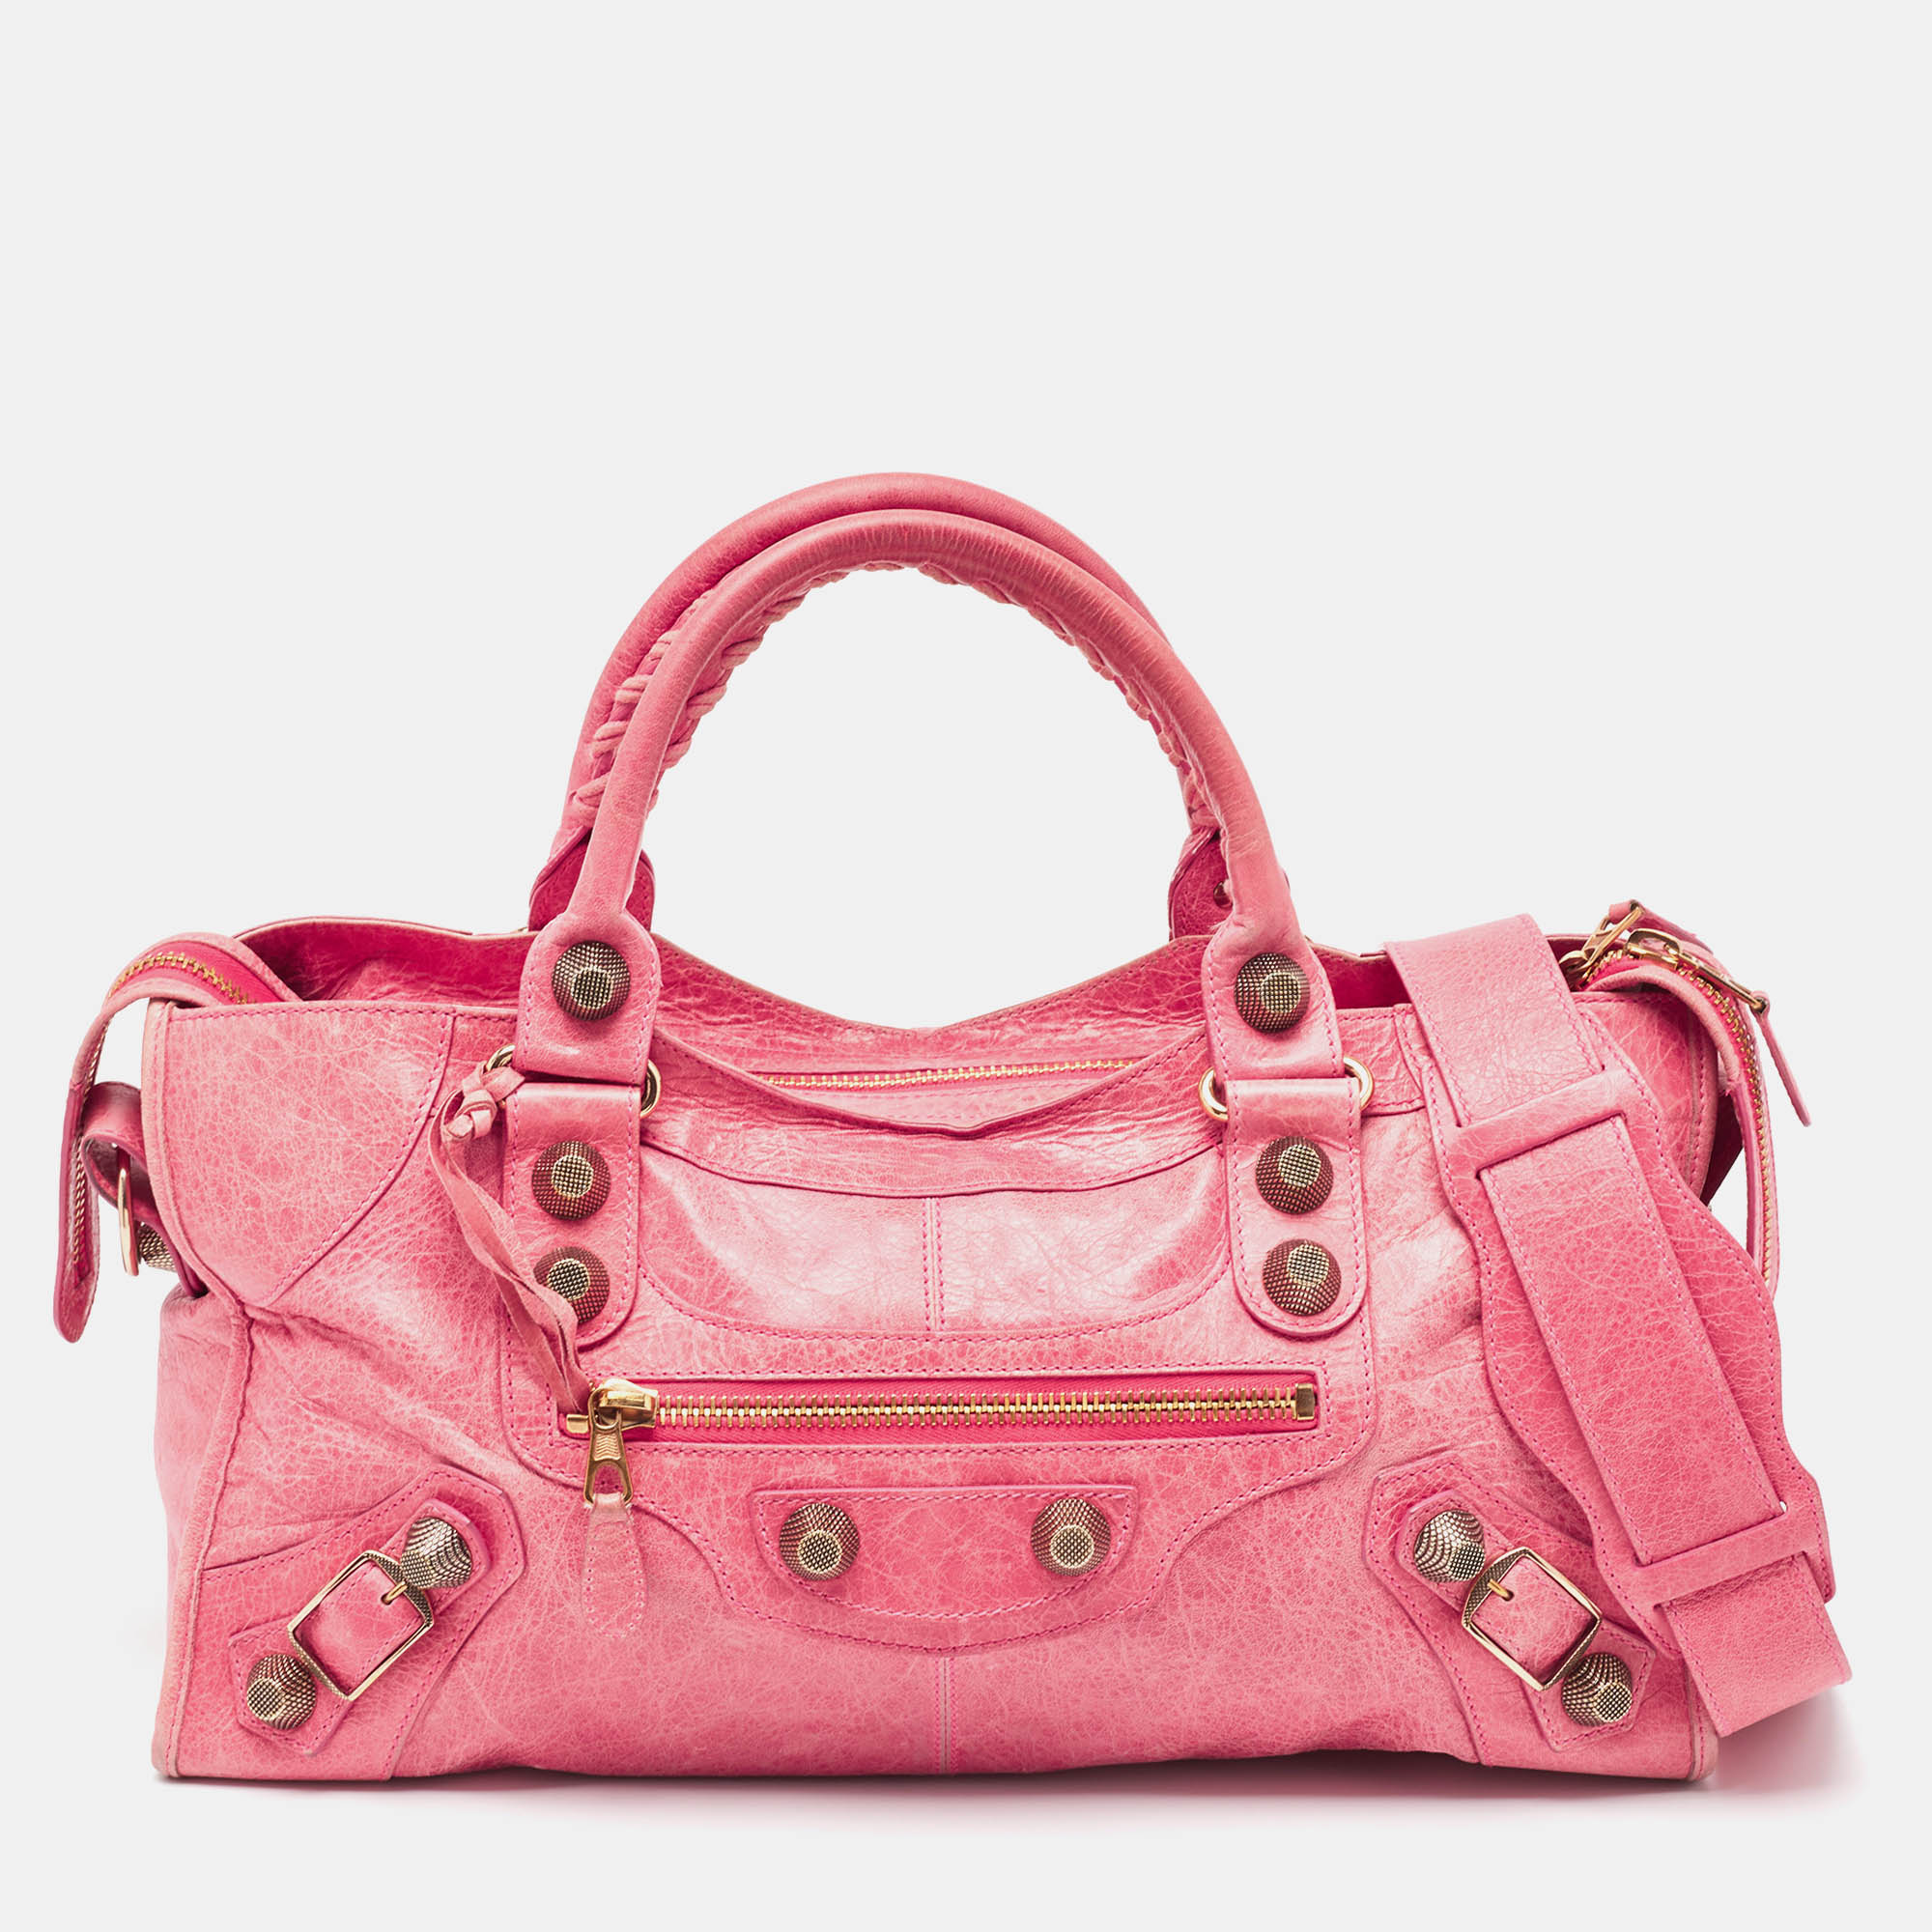 

Balenciaga Pink Leather GGH Part Time Tote